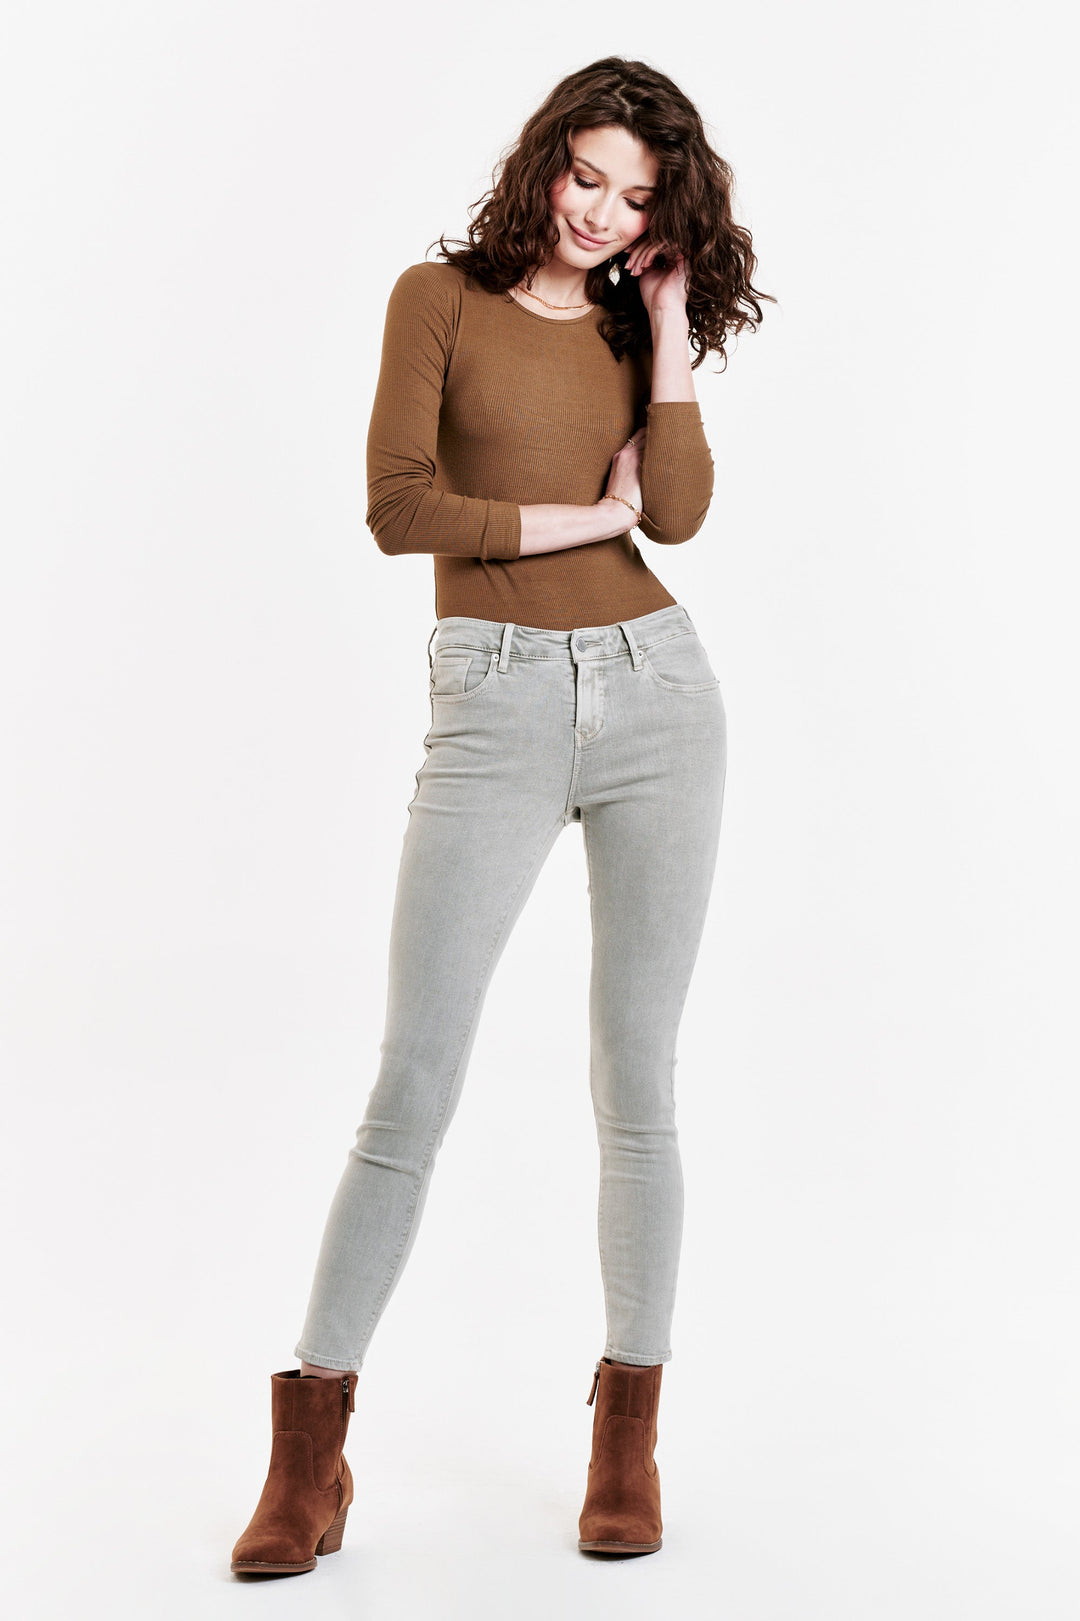 image of a female model wearing a GISELE HIGH RISE ANKLE SKINNY JEANS OYSTER GRAY JEANS